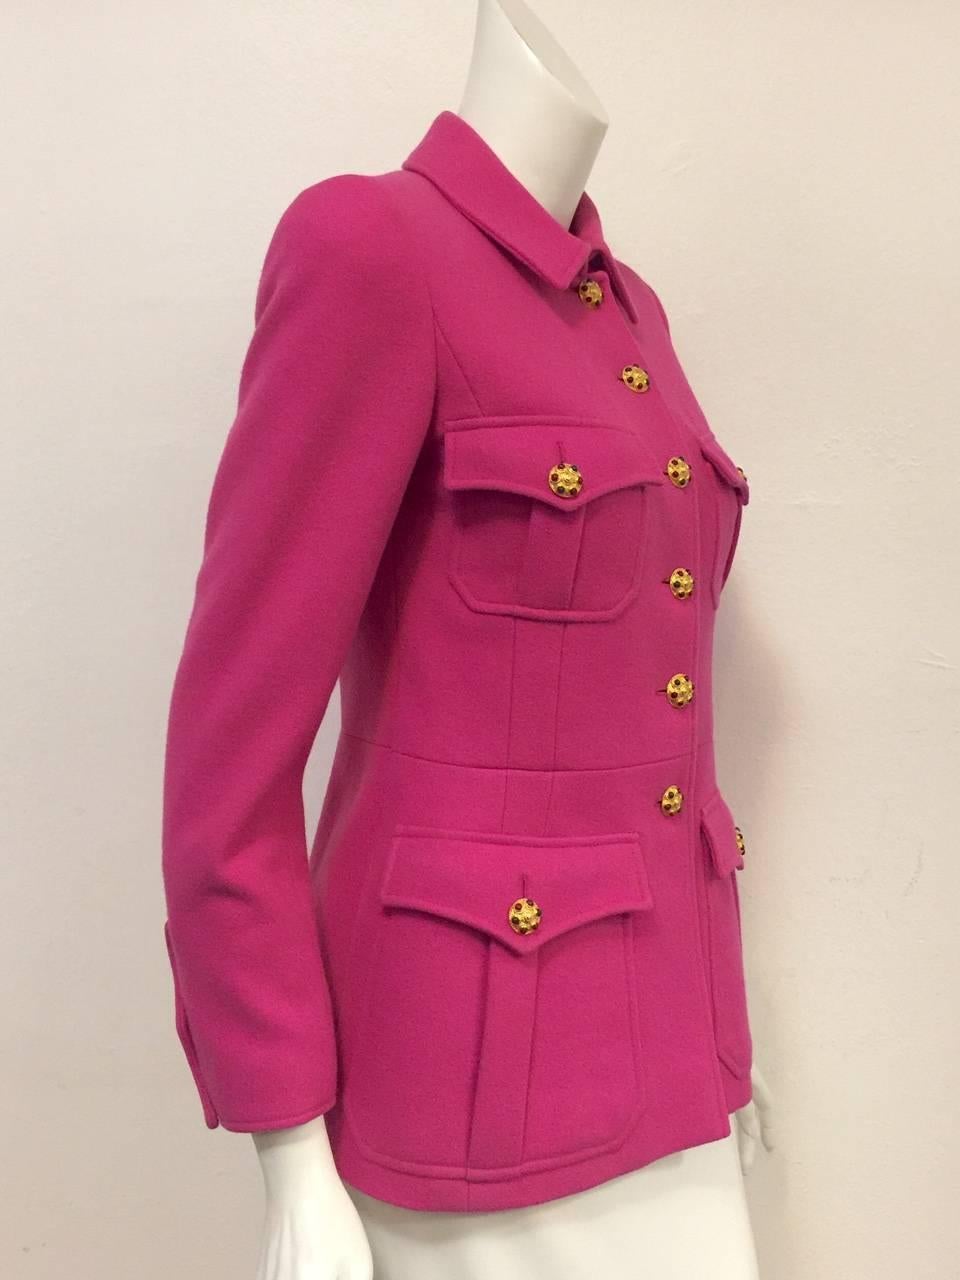 Chanel Boutique 1996 Fall Fuchsia Wool Military Jacket With Gripoix Buttons  In Excellent Condition For Sale In Palm Beach, FL